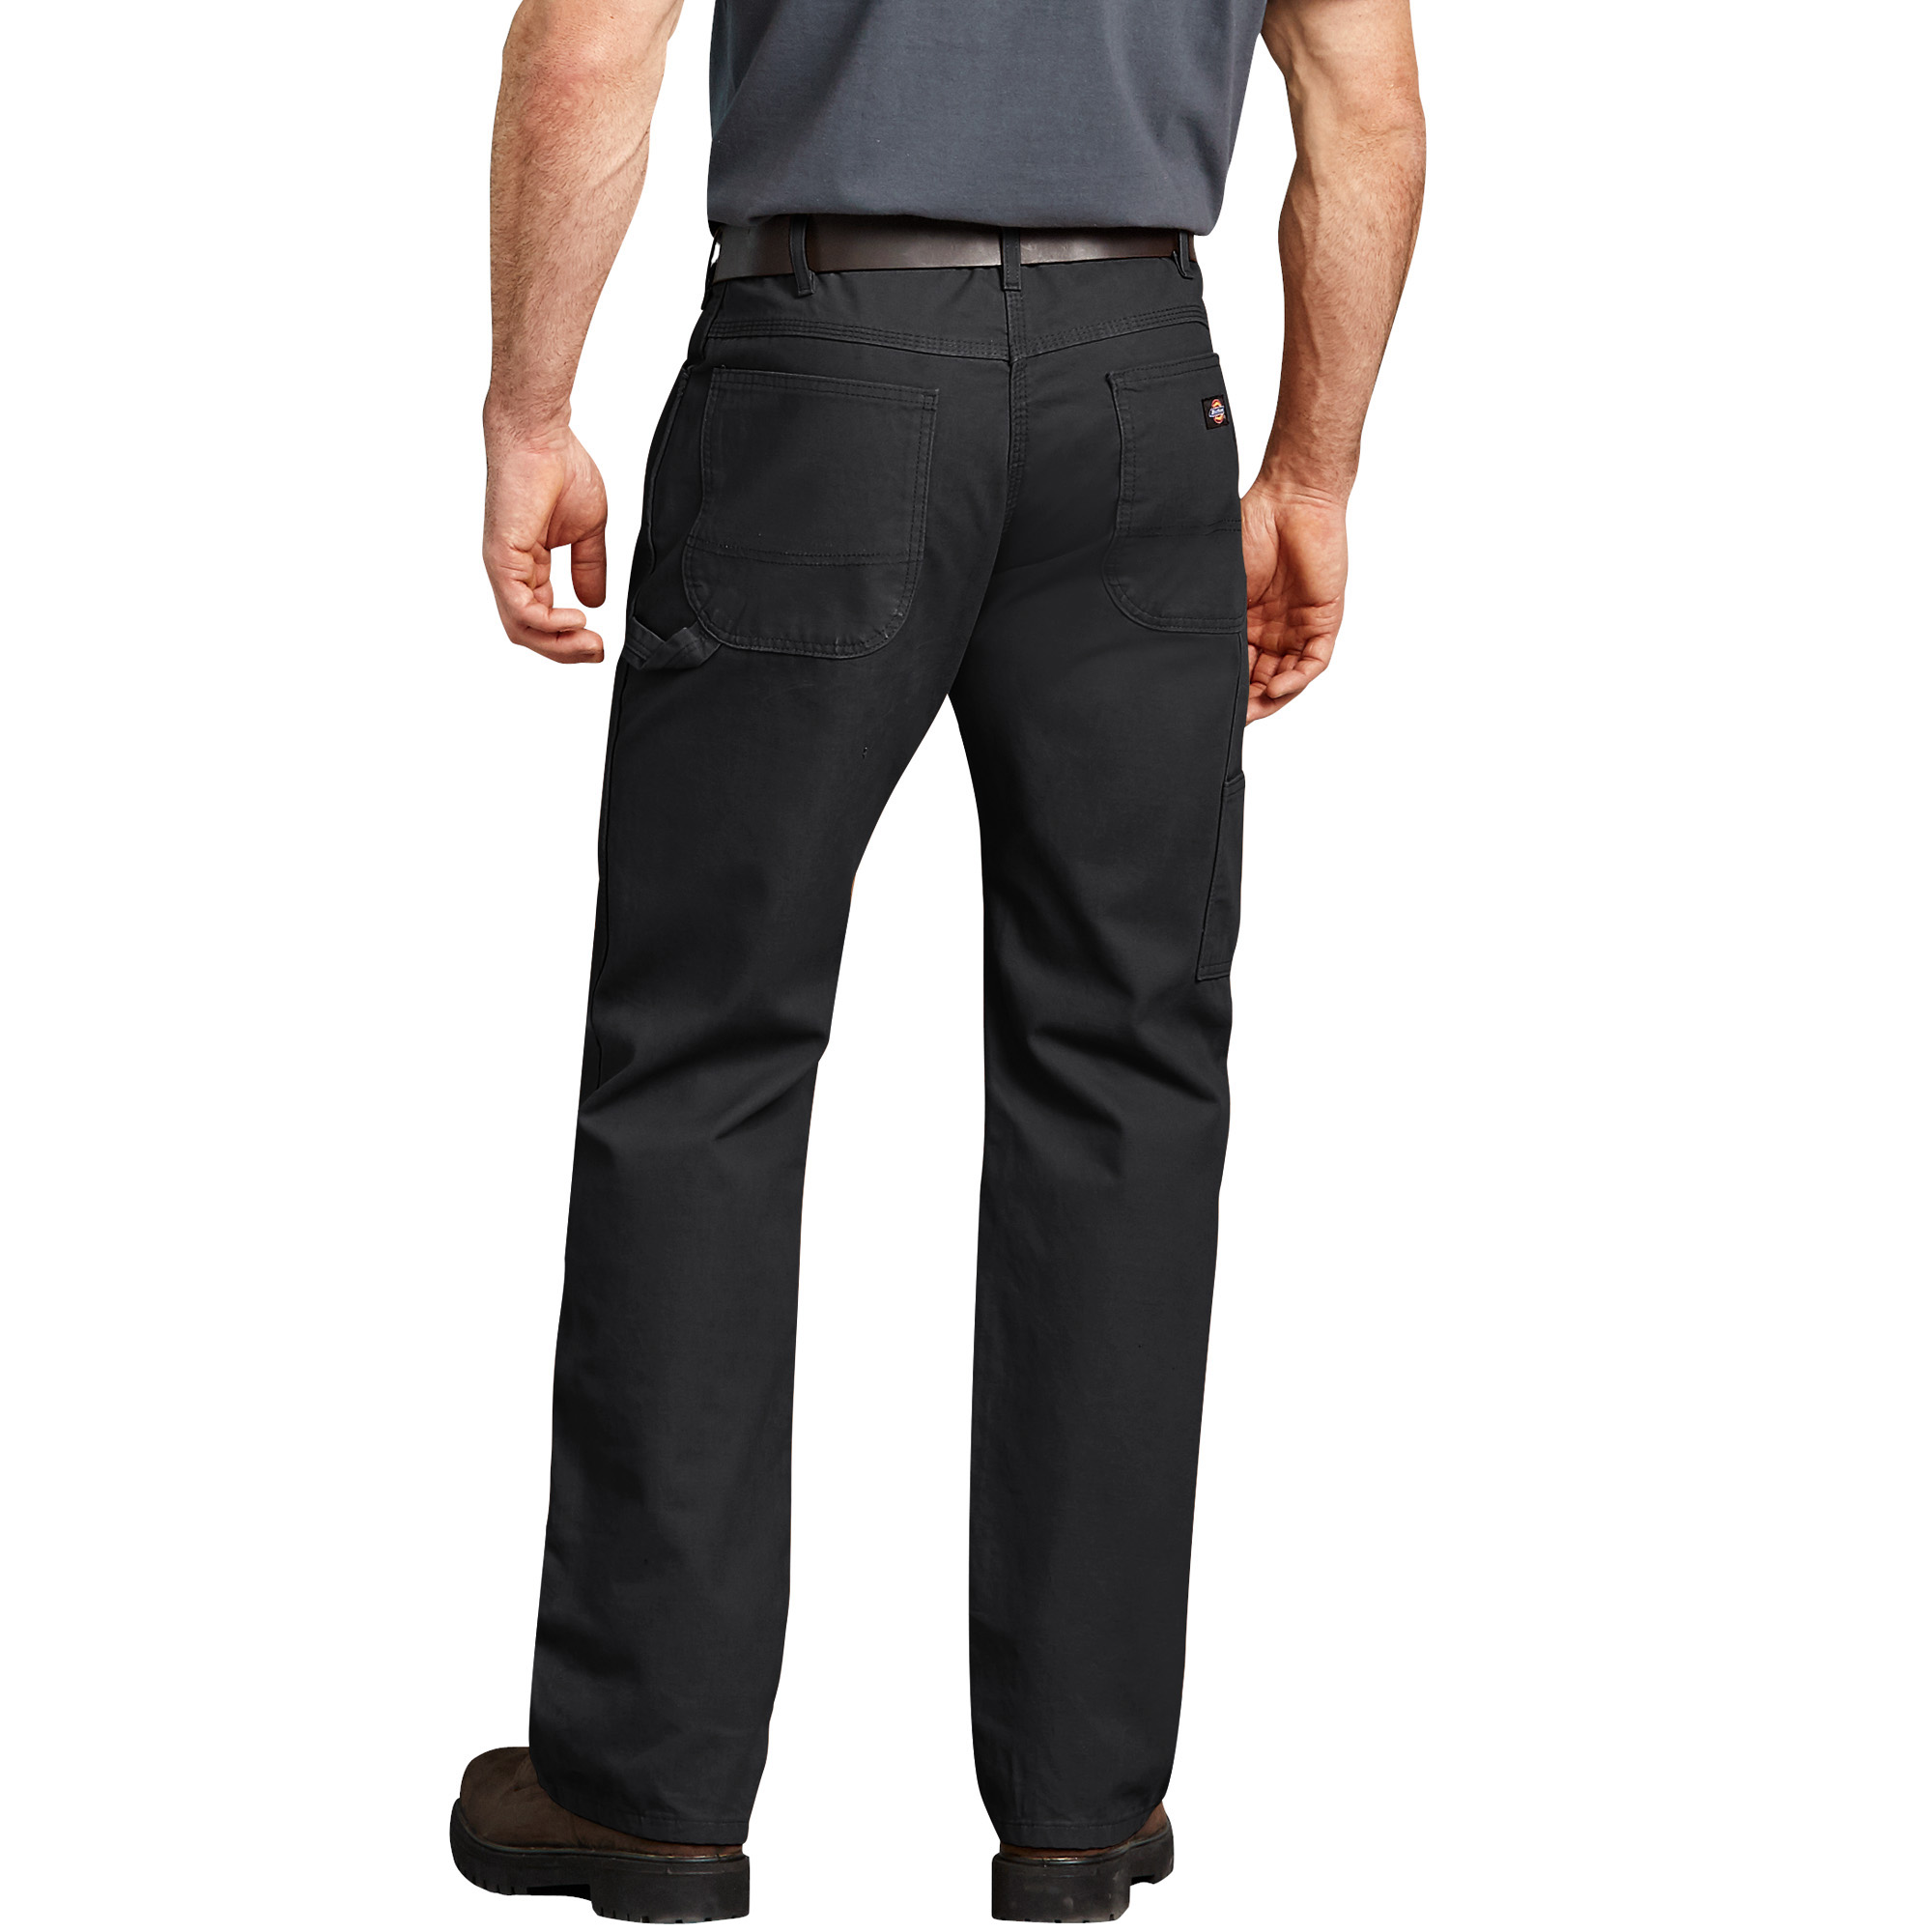 Dickies Mens Relaxed Fit Straight Leg Carpenter Duck Jeans - image 2 of 2